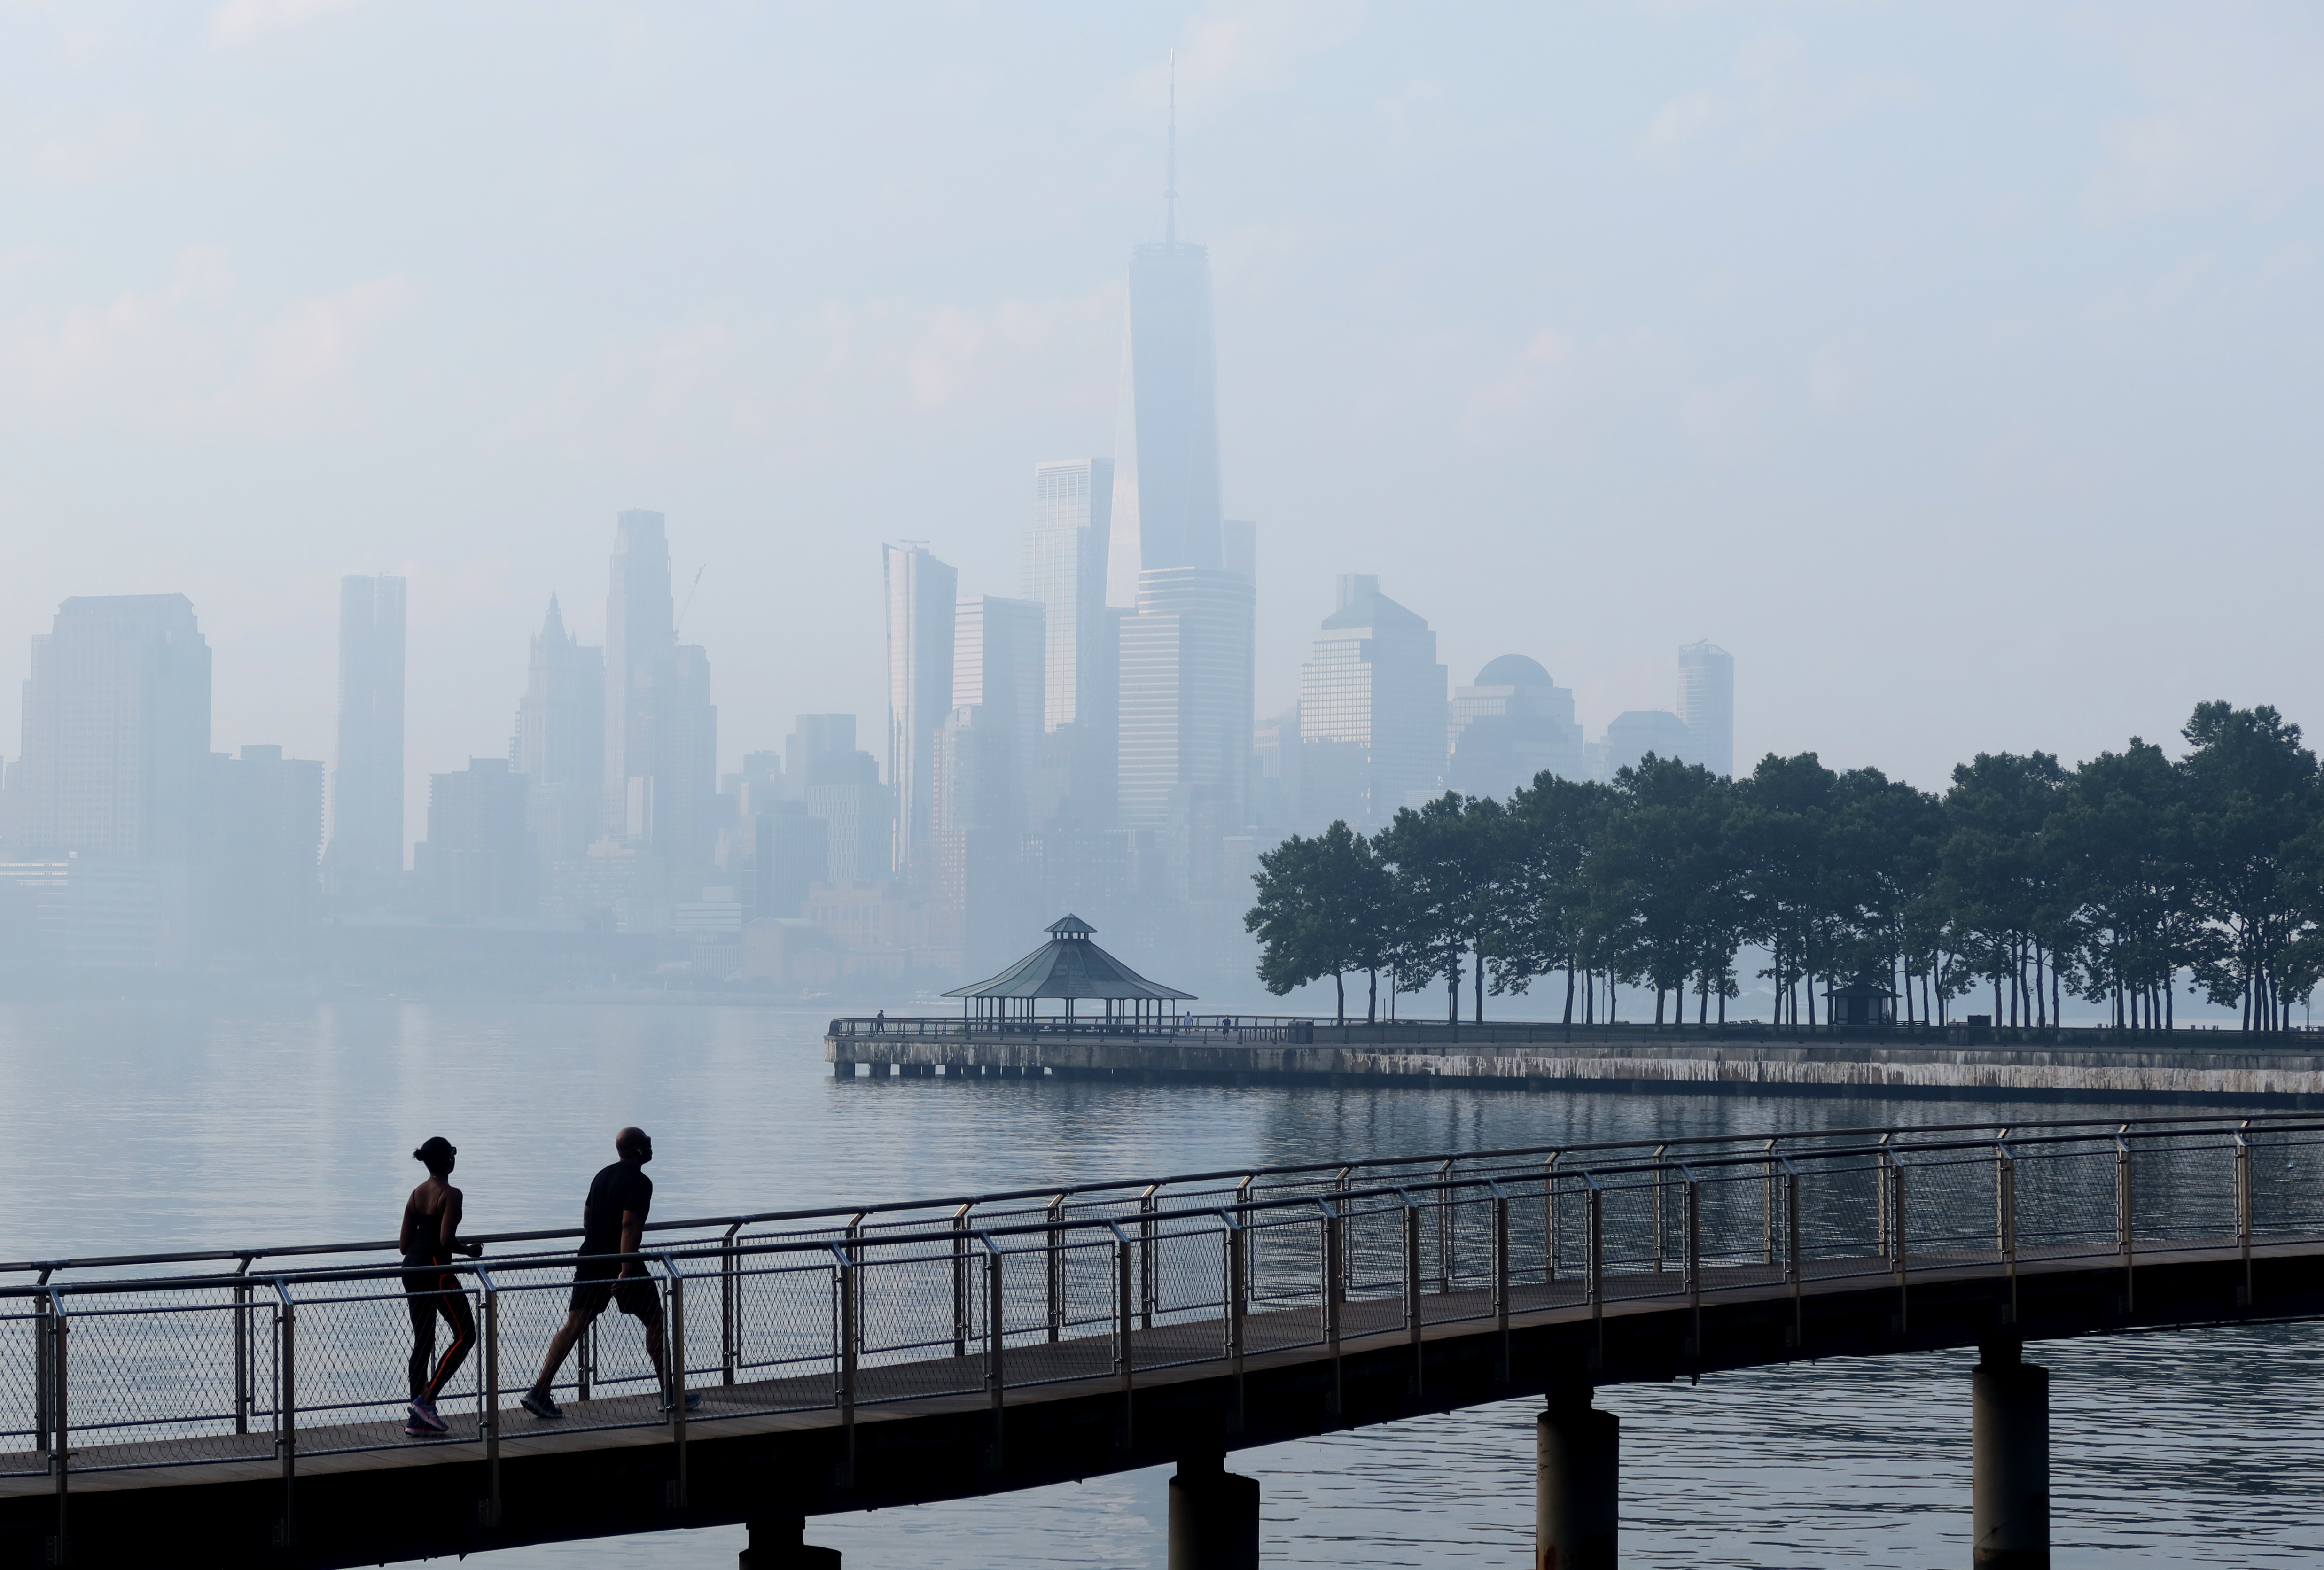 A couple walks on a boardwalk in Hoboken with Freedom Tower in the background.